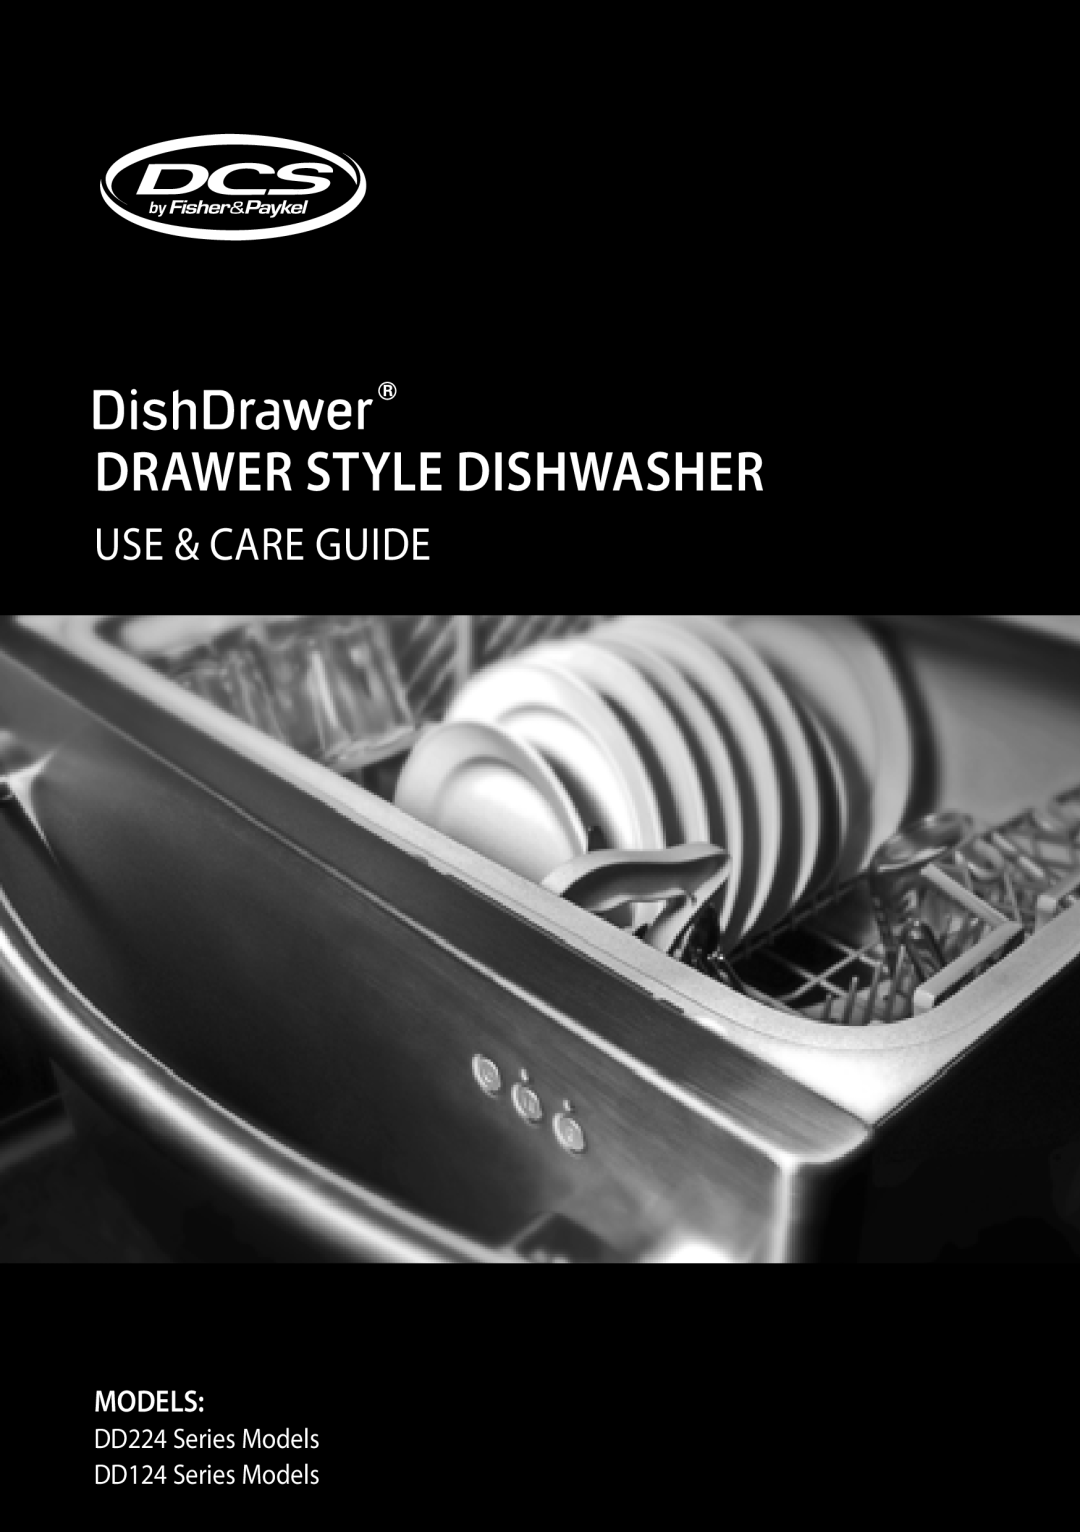 DCS manual Drawer Style Dishwasher, Use & Care Guide, DD224 Series Models DD124 Series Models 